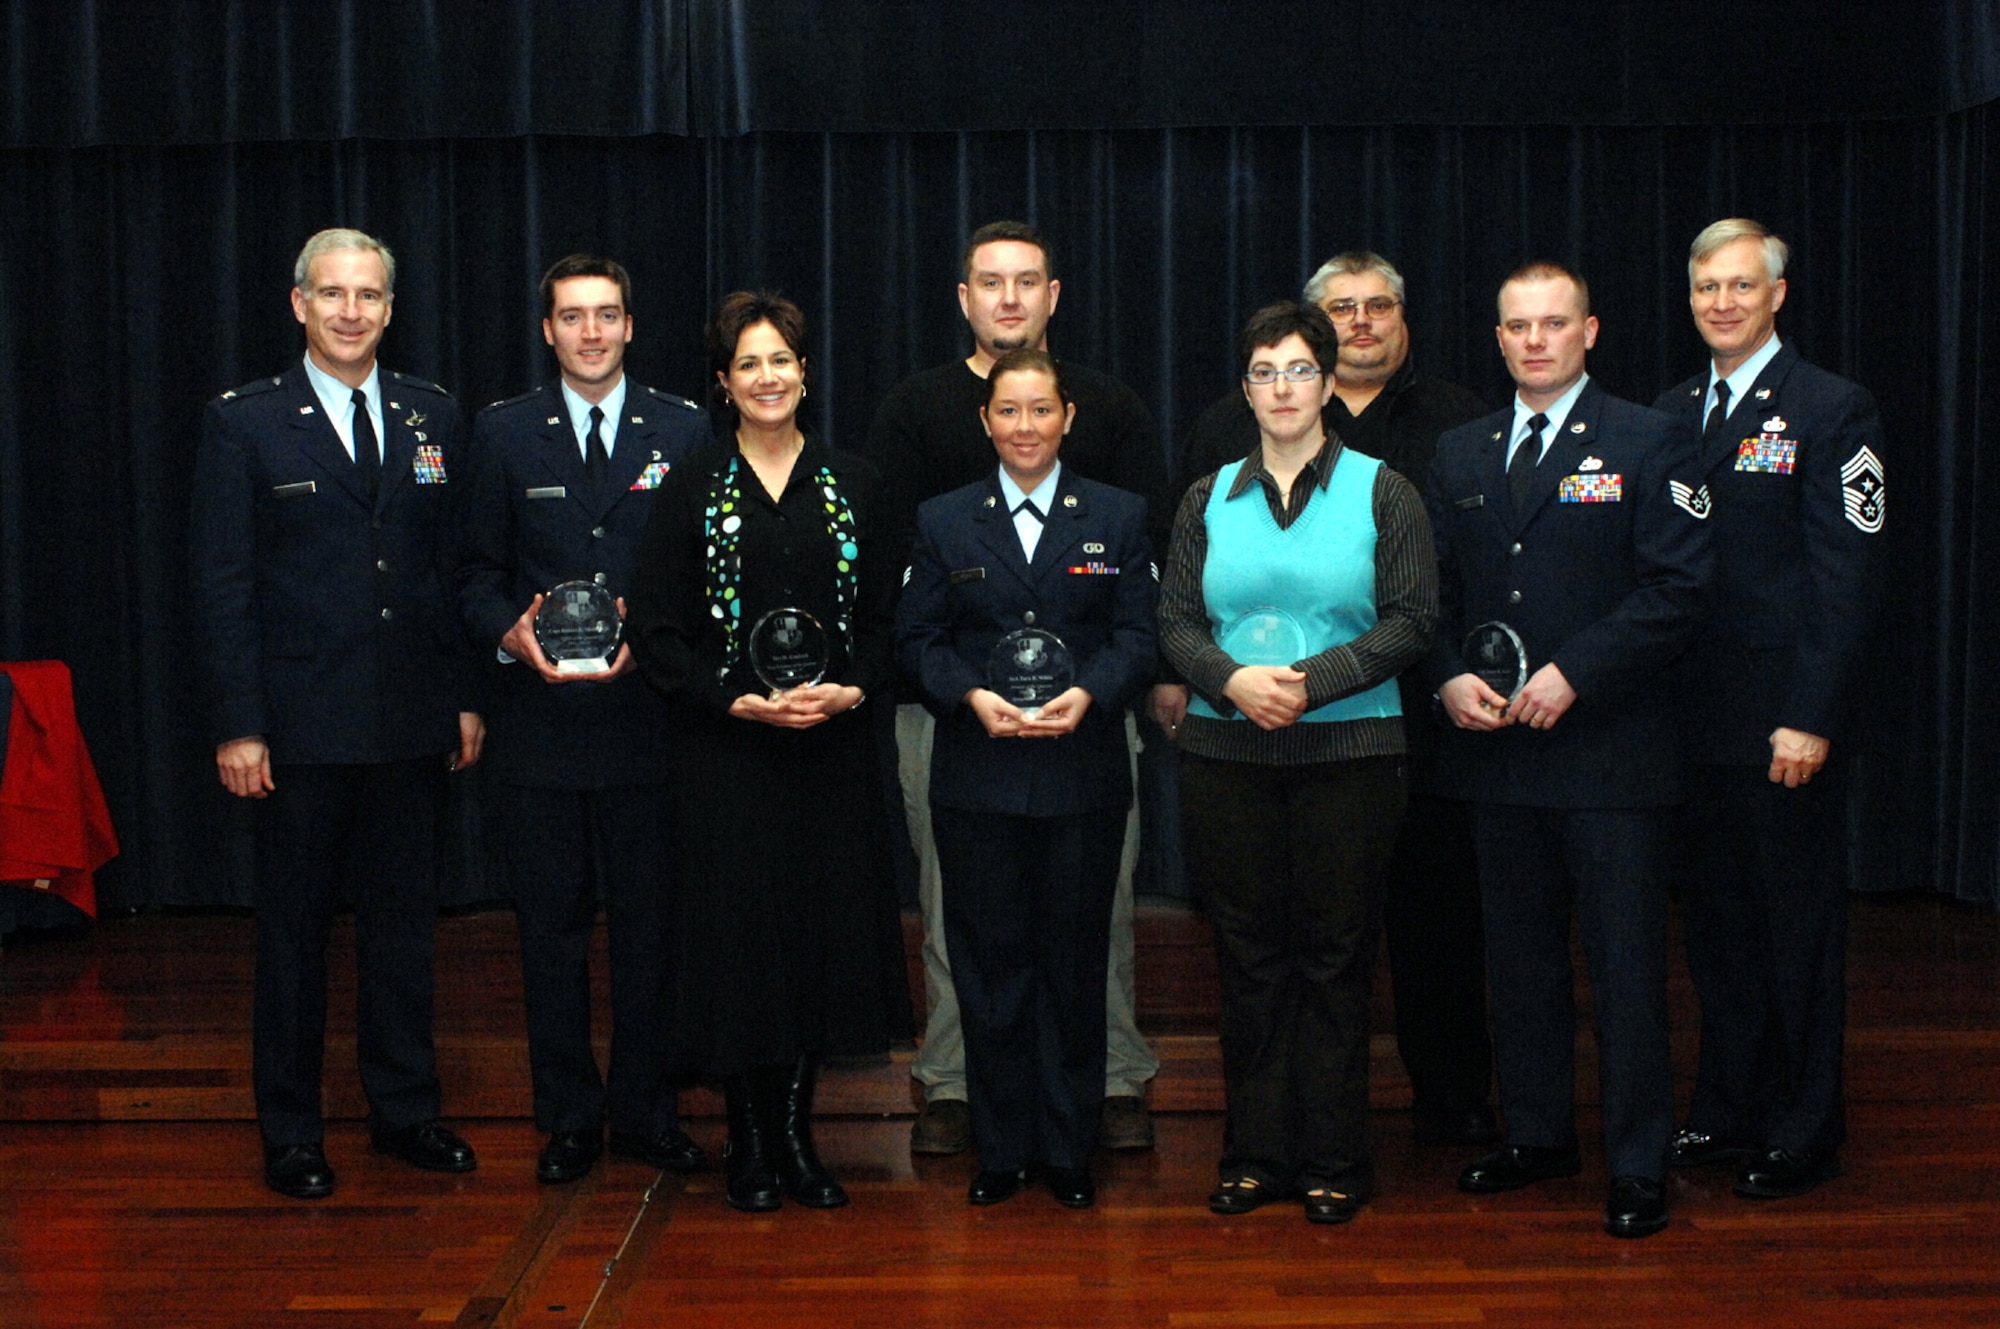 SPANGDAHLEM AIR BASE, Germany – Col. Thomas Feldhausen, 52nd Fighter Wing vice commander, and Chief Master Sgt. Vance Clark, 52nd FW command chief, recognize the base’s fourth quarter award winners. (U.S. Air Force photo/Airman 1st Class Jenifer Calhoun)